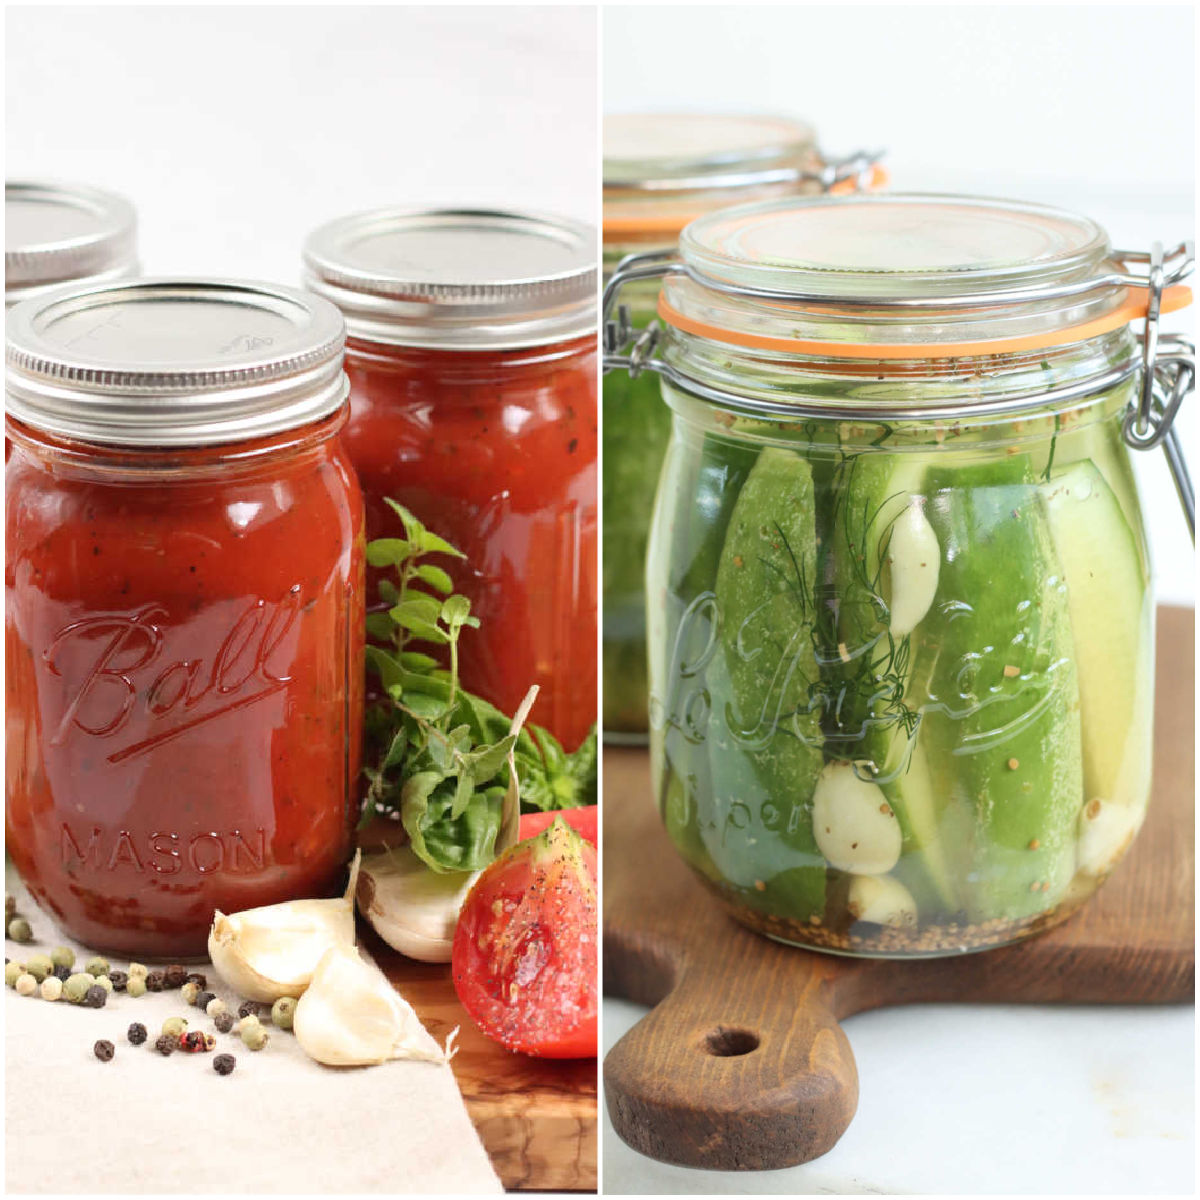 Marinara sauce in Mason jars, Dill pickles in glass jar with clasp lid.